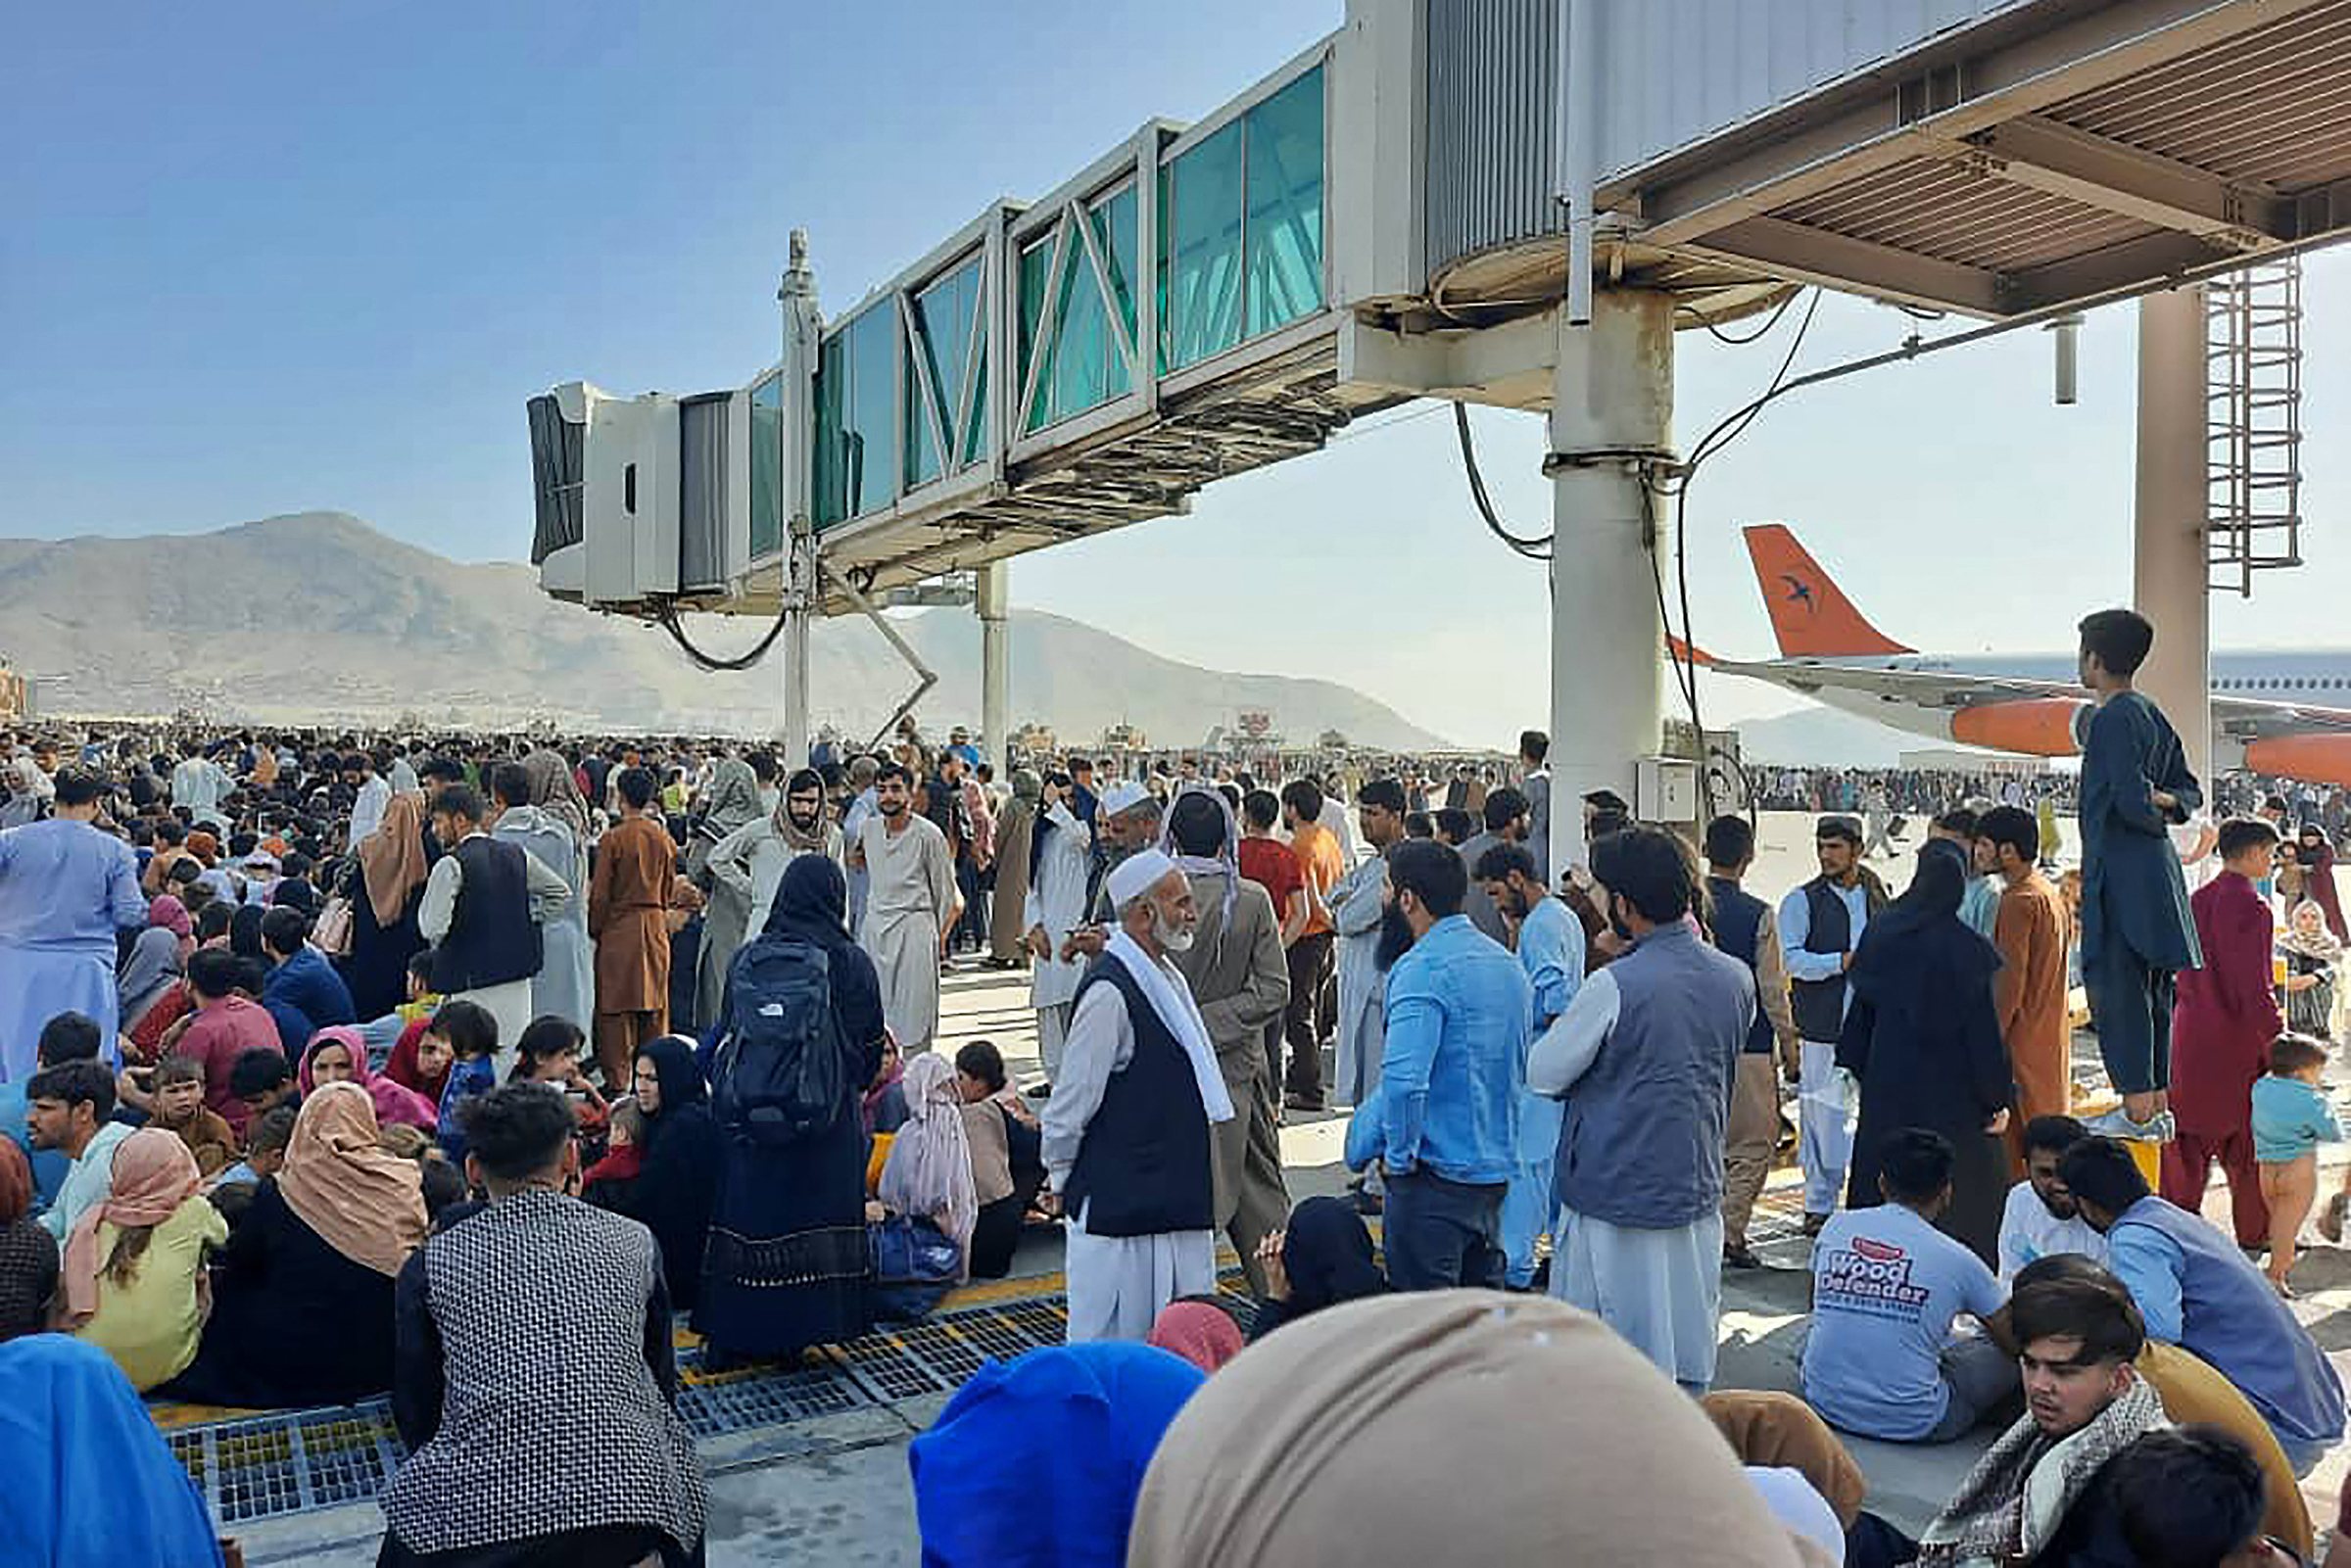 Afghans fleeing the Taliban's arrival in Kabul crowd the tarmac of the airport on Aug. 16, 2021.